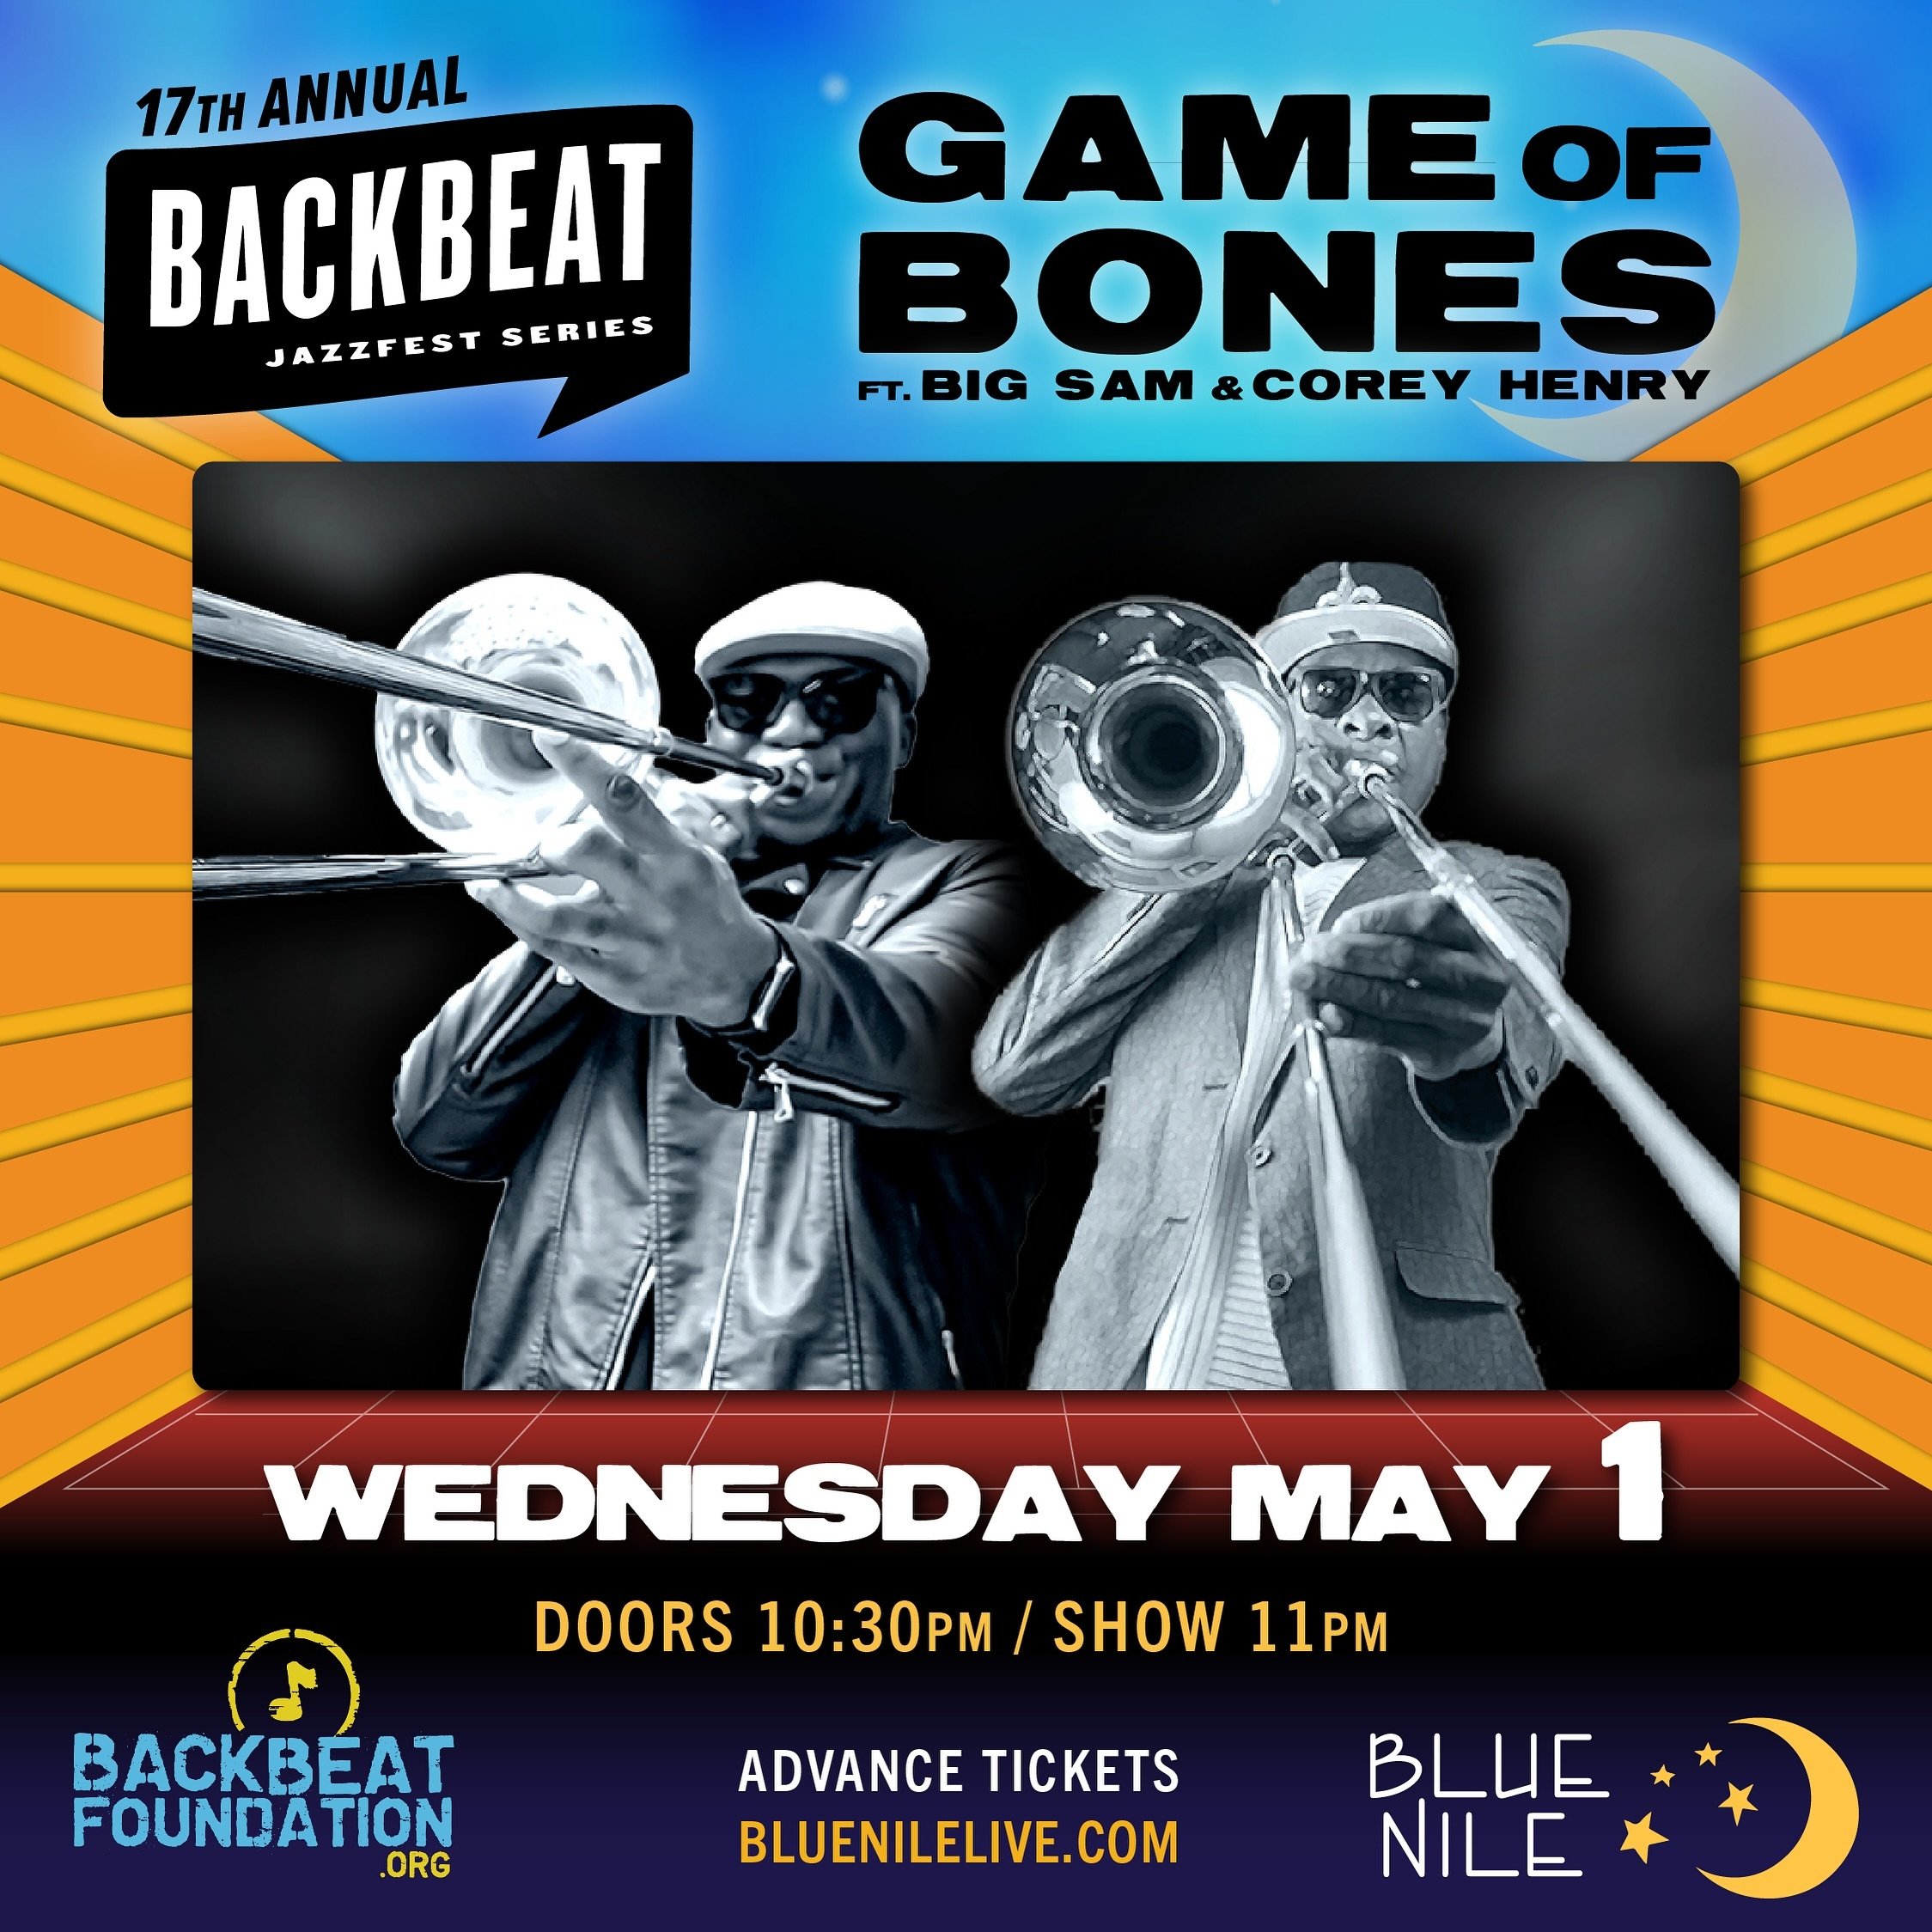 TONIGHT!! It&rsquo;s goin&rsquo; DOWN! 
Game of Bones 11PM
17th Annual Backbeat JazzFest Series PLAYS ON!
✨🌙 Advance Tickets bluenilelive.com

Creator Ensemble 9PM
New Breed Brass Band BALCONY PARTY 9:30PM in the&nbsp;&nbsp;Blue Nile Balcony Room (U